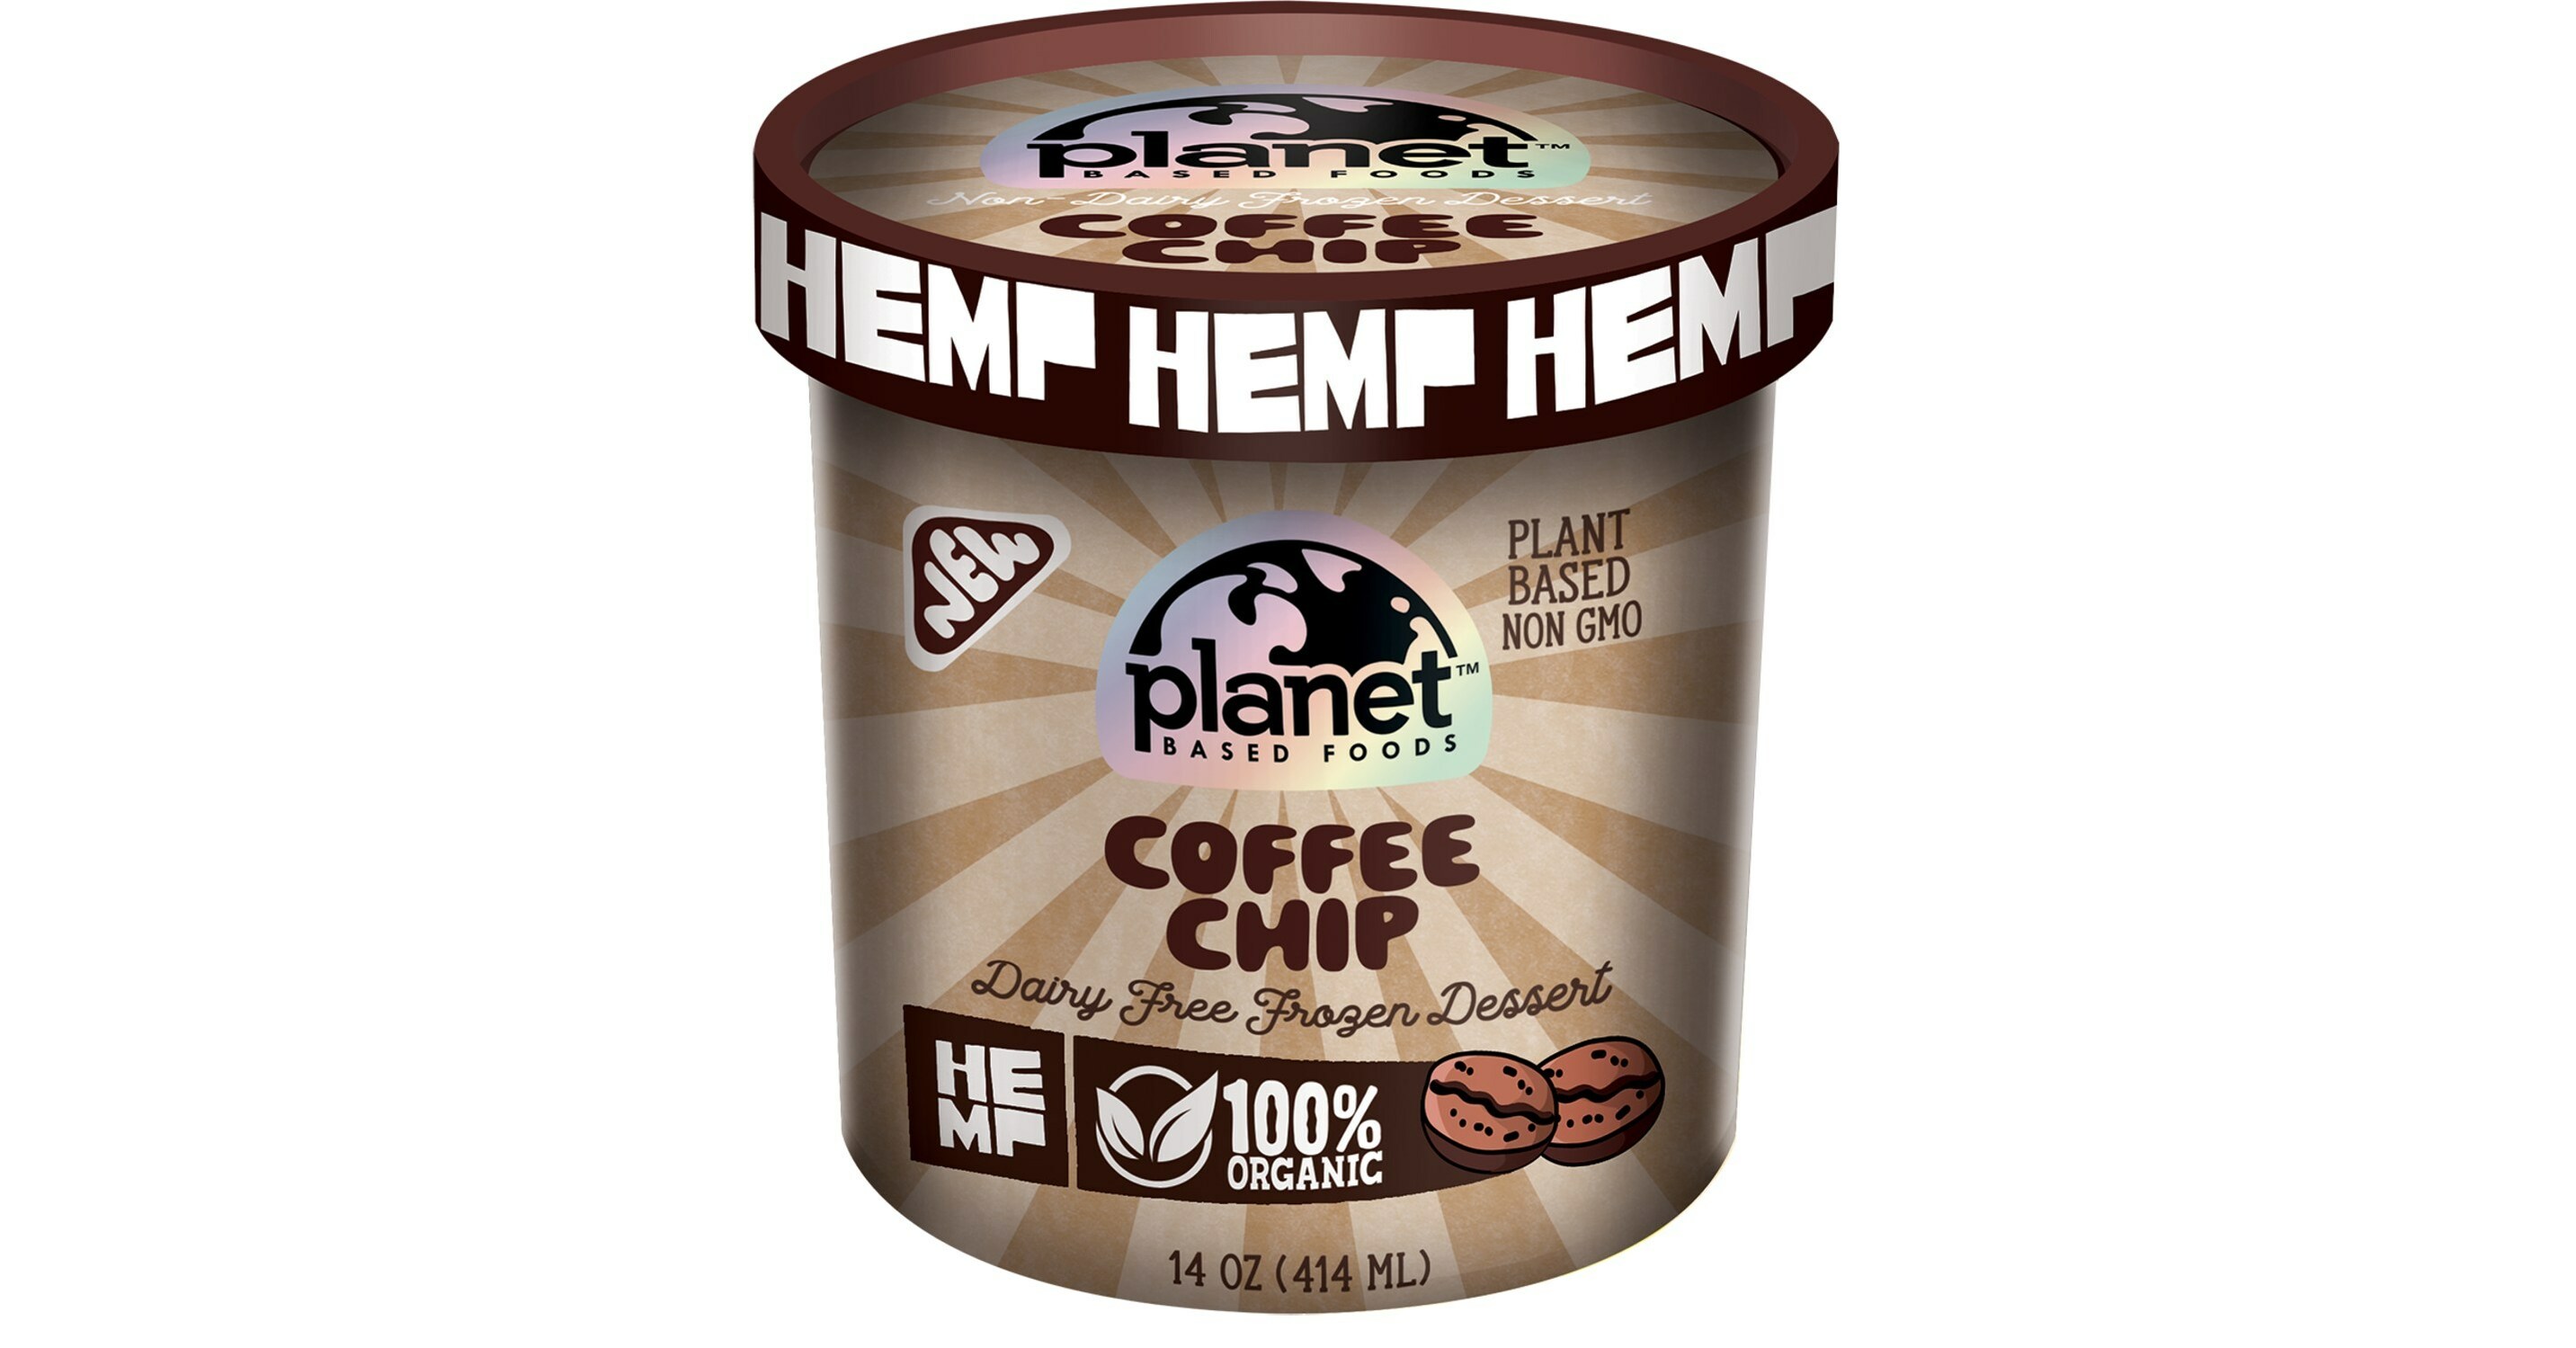 PLANET BASED FOODS TO DEBUT ORGANIC HEMP-BASED VEGAN ICE CREAM AT NATURAL PRODUCTS EXPO WEST